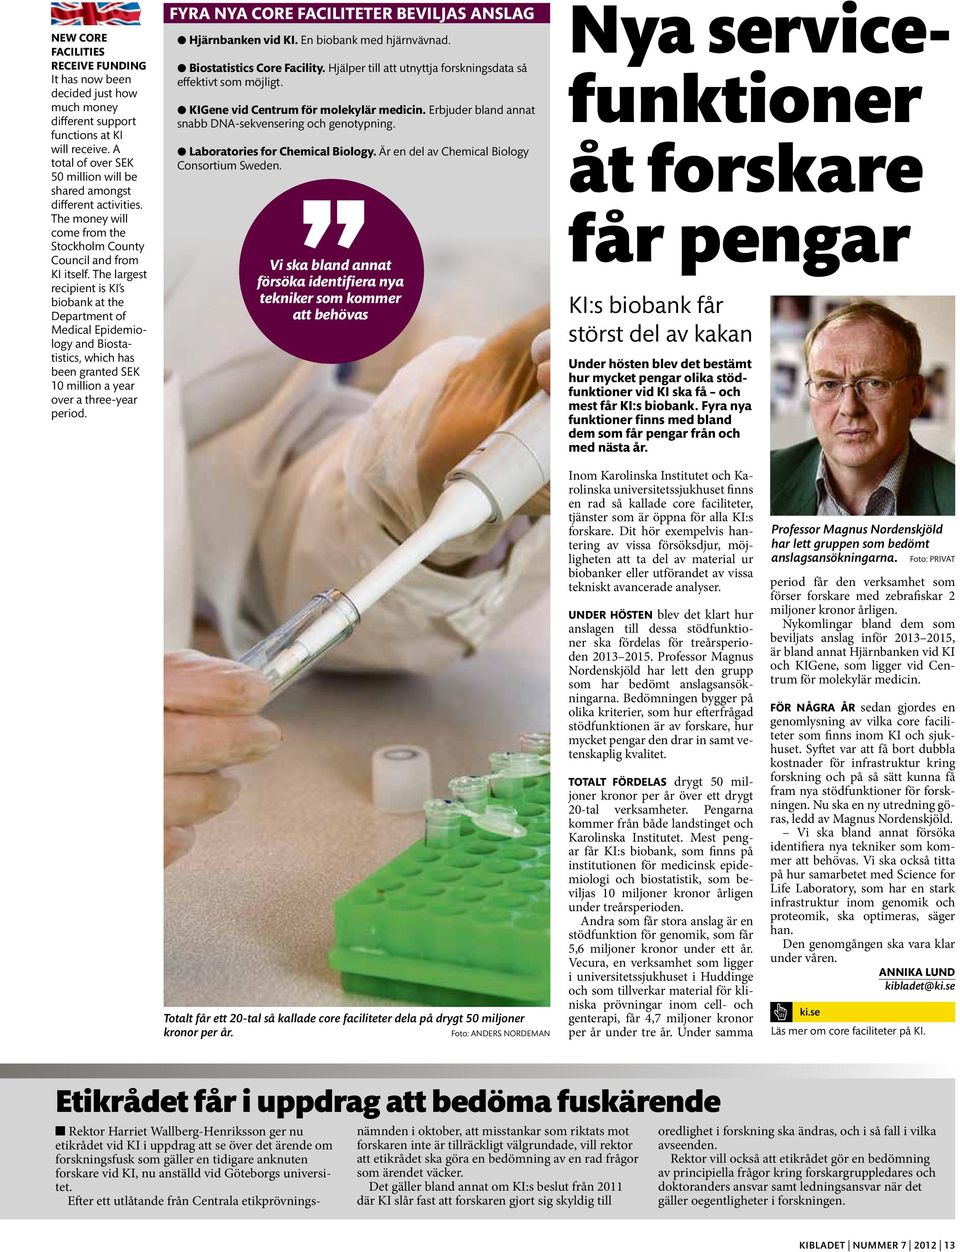 The largest recipient is KI s biobank at the Department of Medical Epidemiology and Biostatistics, which has been granted SEK 10 million a year over a three-year period.